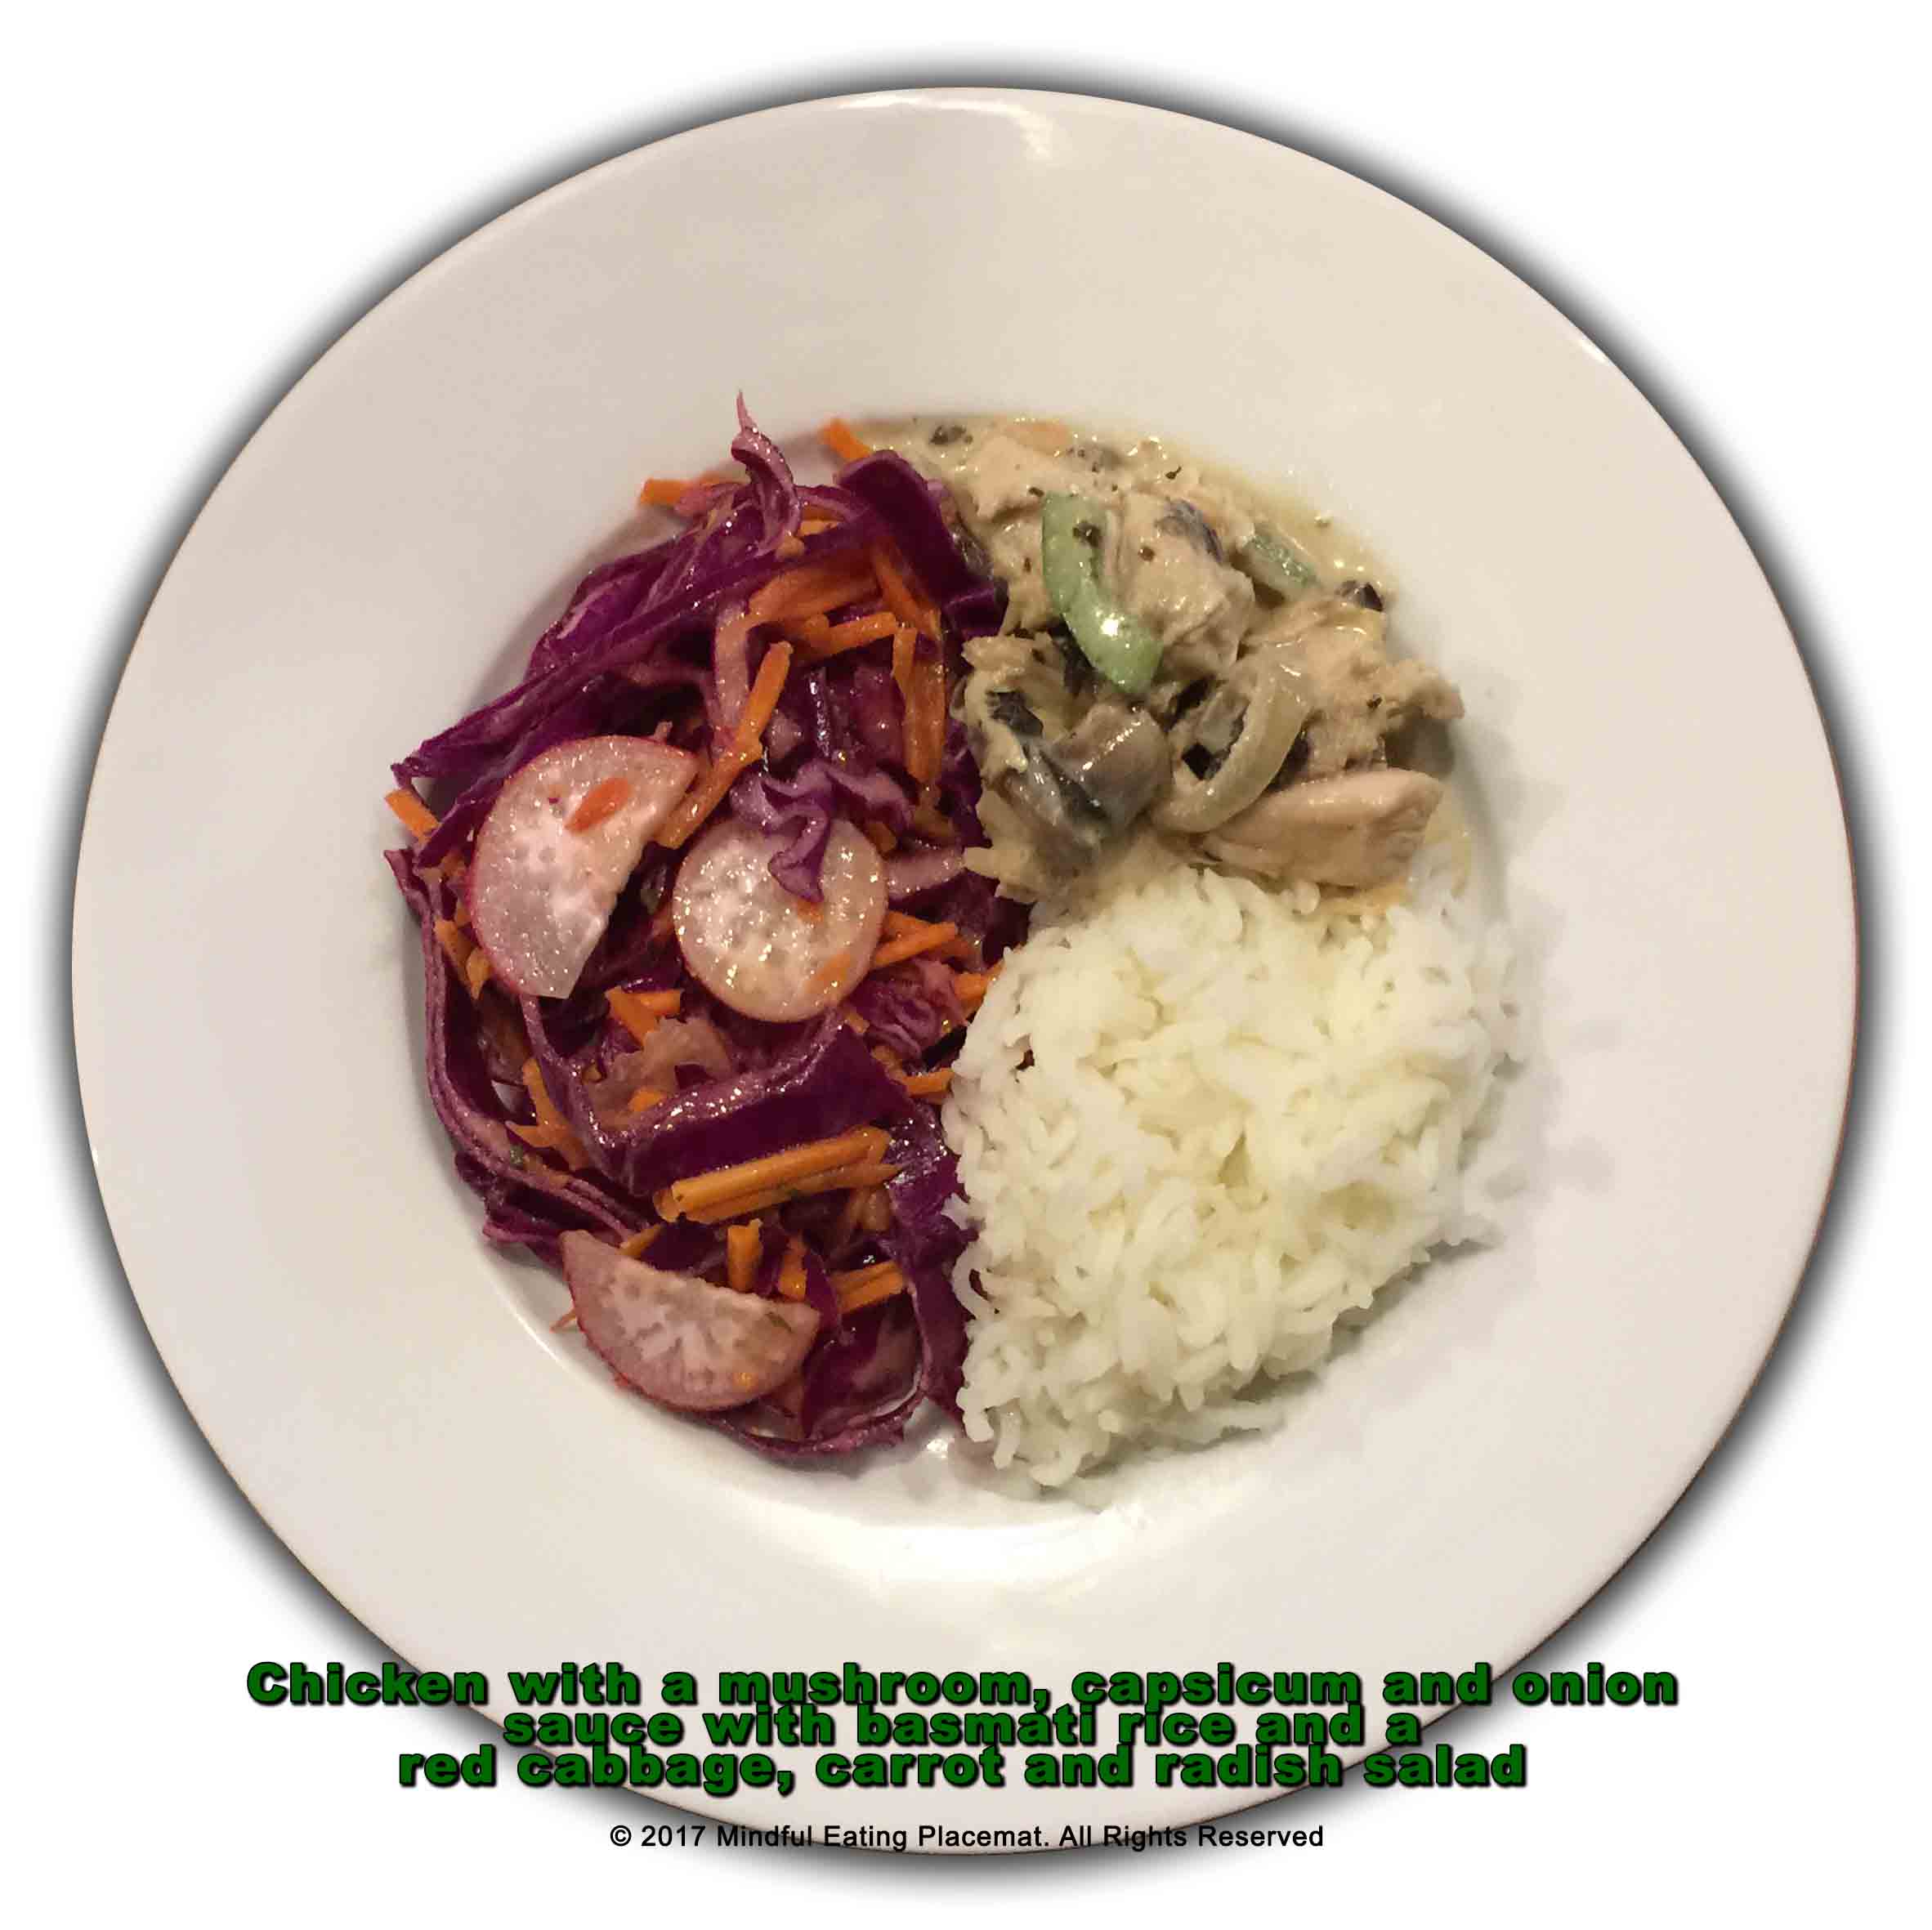 Chicken with mushrooms, capsicum and onion, with basmati rice and red cabbage salad